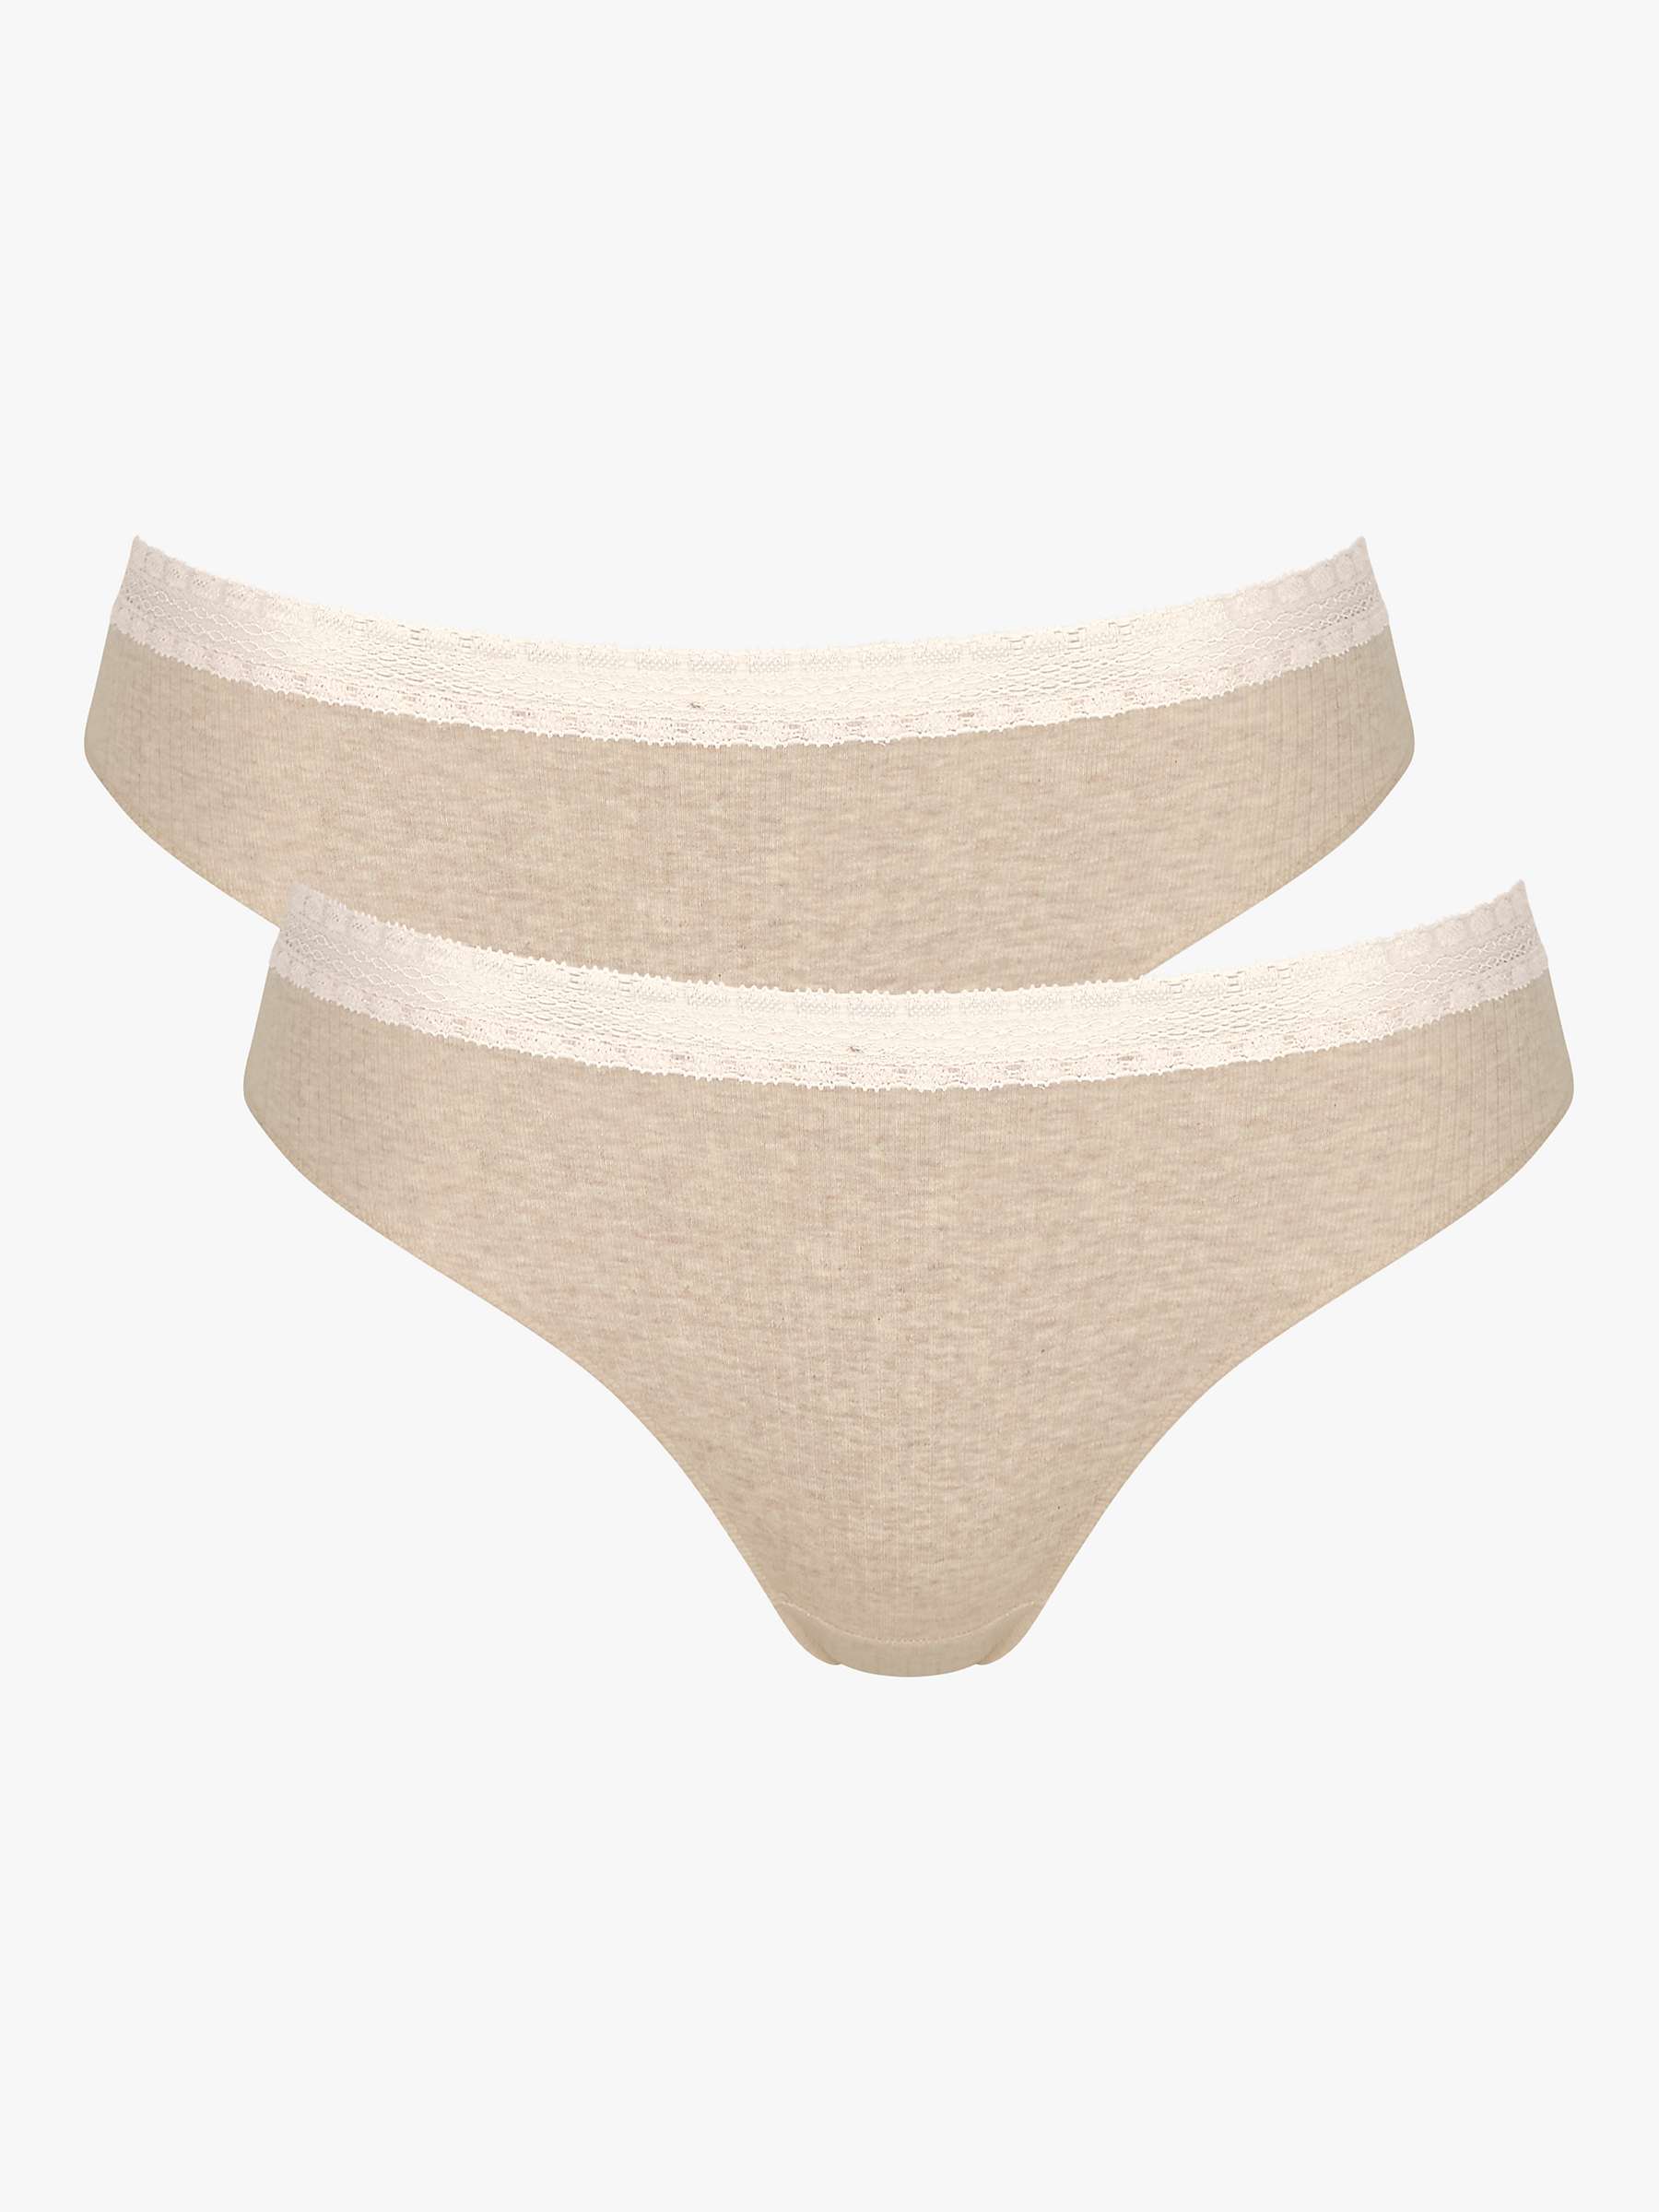 Buy sloggi GO Ribbed Tai Briefs, Pack of 2 Online at johnlewis.com